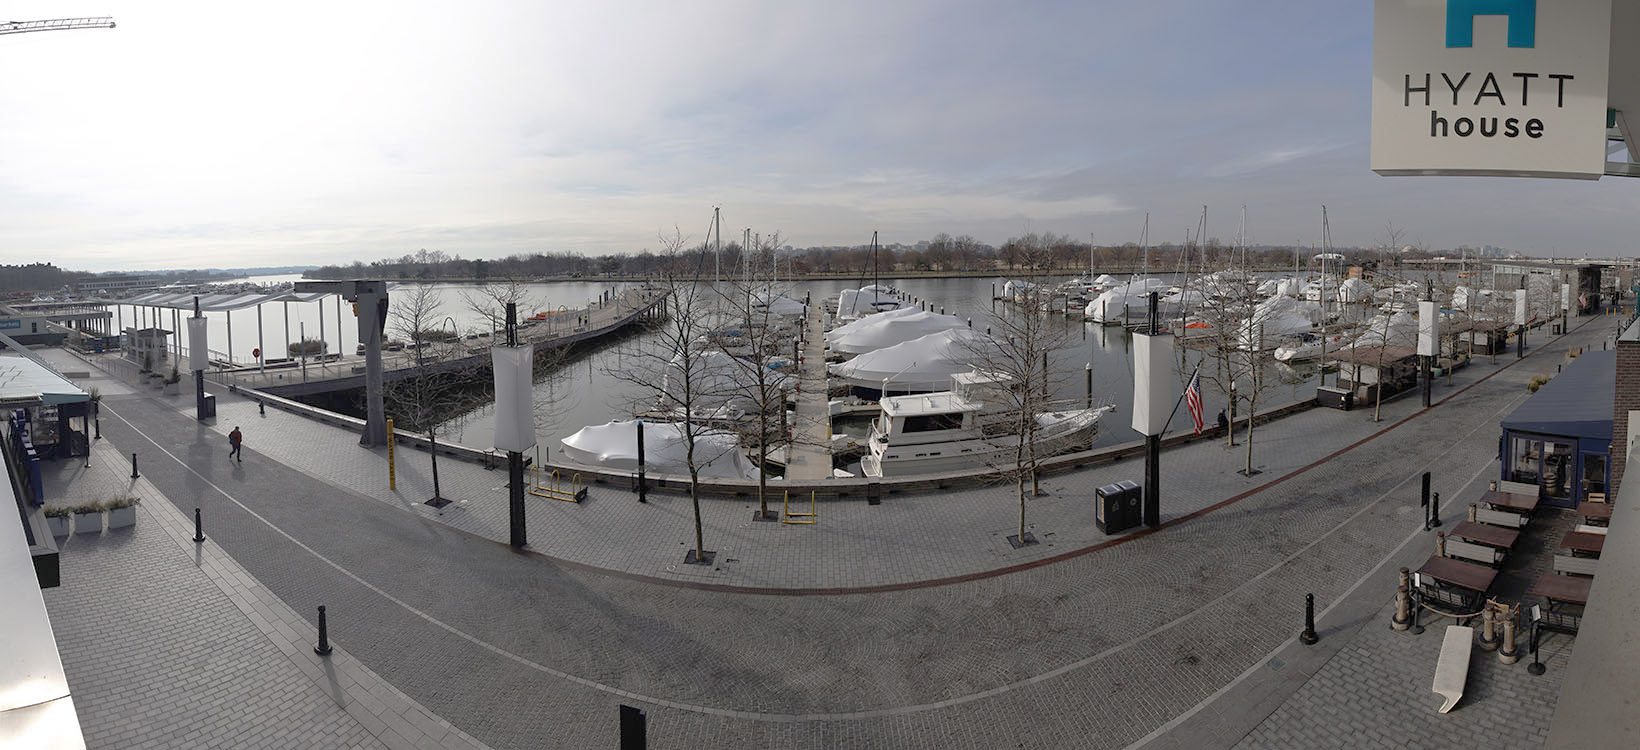 Stitched Panorama of the Washington Waterfront Deserted in Winter